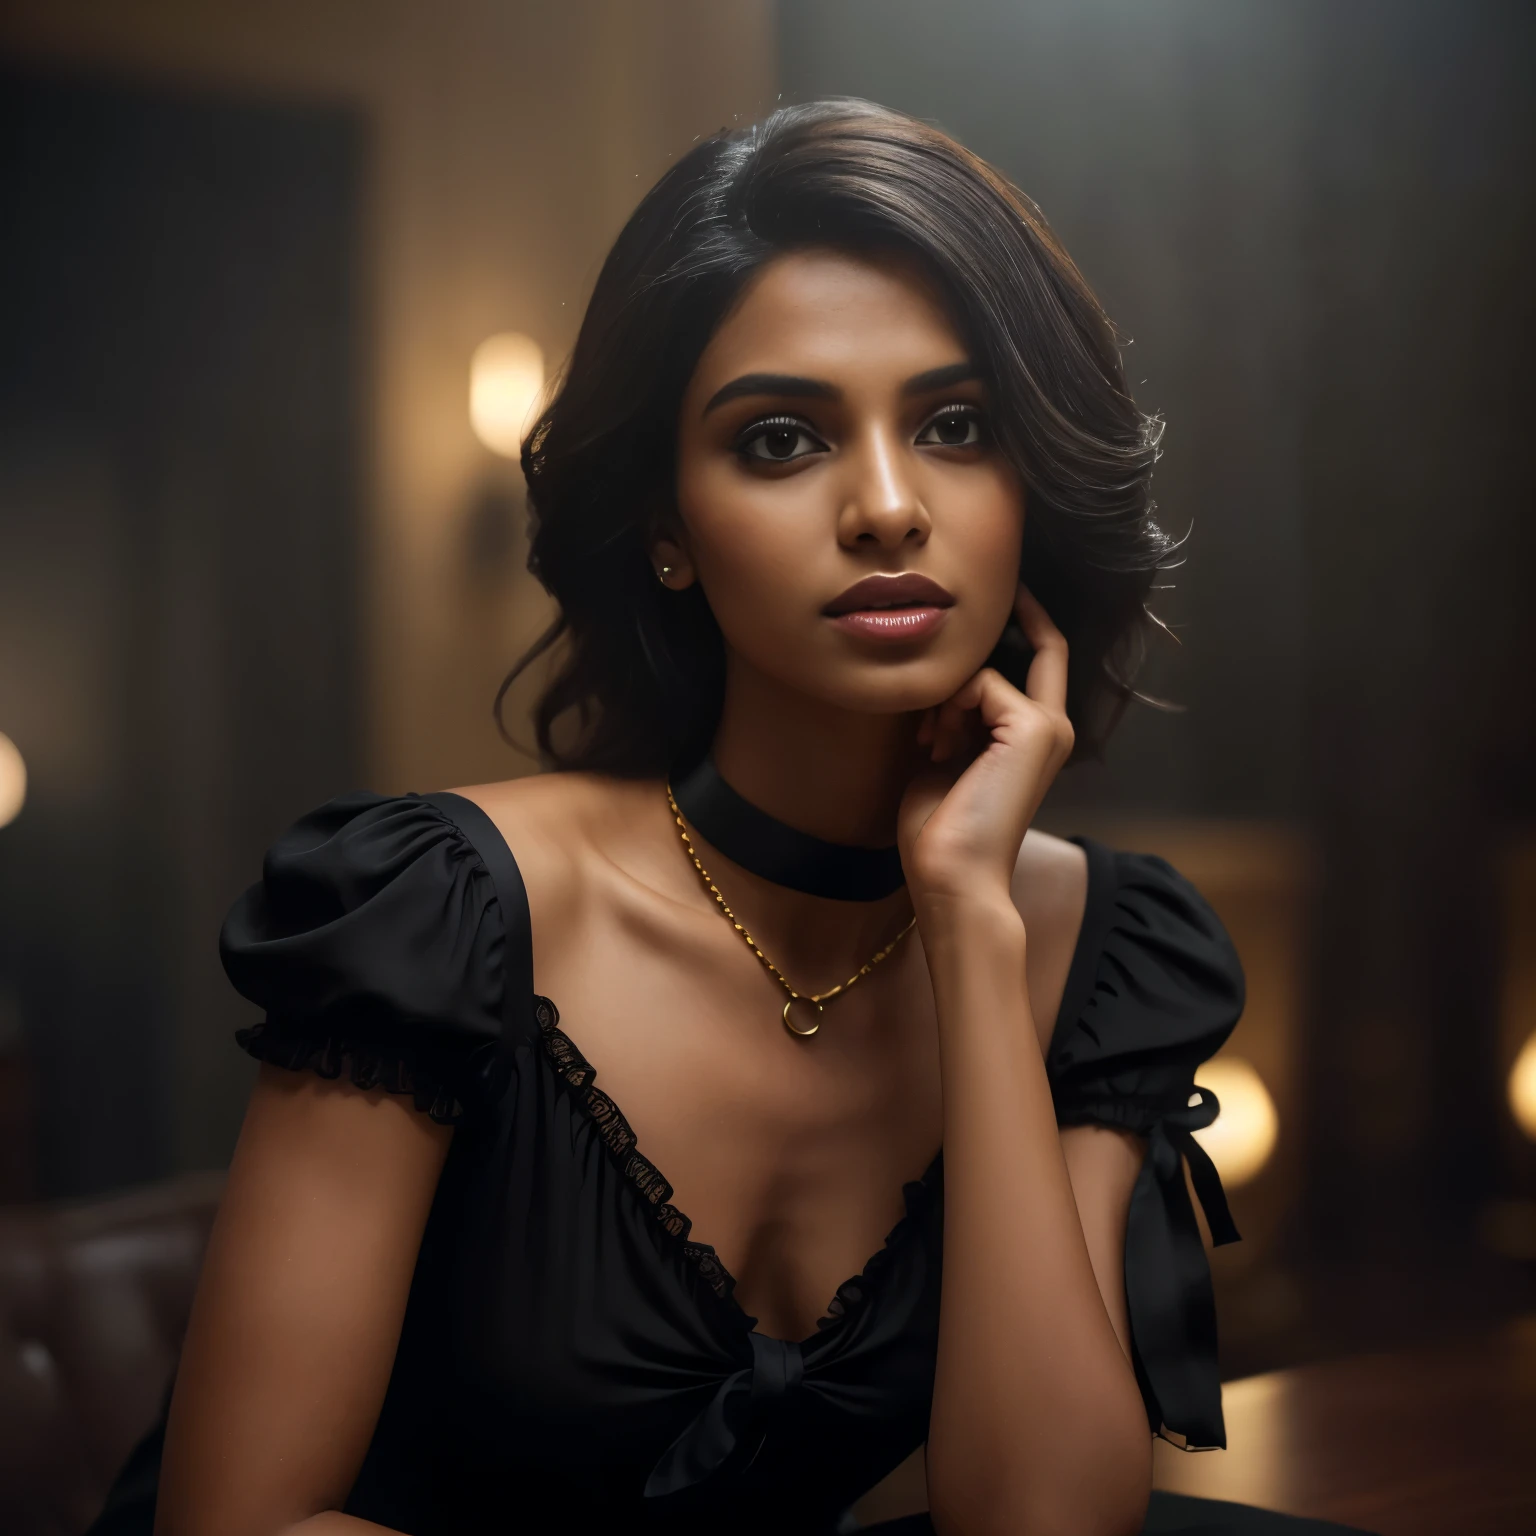 In this photograph, an Indian Instagram female model in her mid-20s takes center stage. , (highly detailed face:1.4) (smile:0.7) (backround 5 star hotel , moody, private study:1.OV, by lee jeffries, nikon d850, film stock photograph ,4 kodak portra 400 ,camera f1.6 lens ,rich colors ,hyper realistic ,lifelike texture, dramatic lighting , cinestill 800, realistic, wearing Black dobby weave self design fit & flare dress Sweetheart neck Short, puff sleeve Tie-up detail on back Above knee length in flounce hem Attached Lining Chiffon fabric, actress, karla ortiz, posing!!, candid picture, by Max Dauthendey,Completing the aesthetic, the model wears a slave collar with a chain around her neck. The photograph is meticulously captured in 8K resolution using cutting-edge techniques such as Cinema 4D and Octane Render, resulting in a highly detailed and photorealistic image. Studio lighting, HDR, and a smoky mist create a captivating ambiance, while the bokeh effect adds an artistic touch.